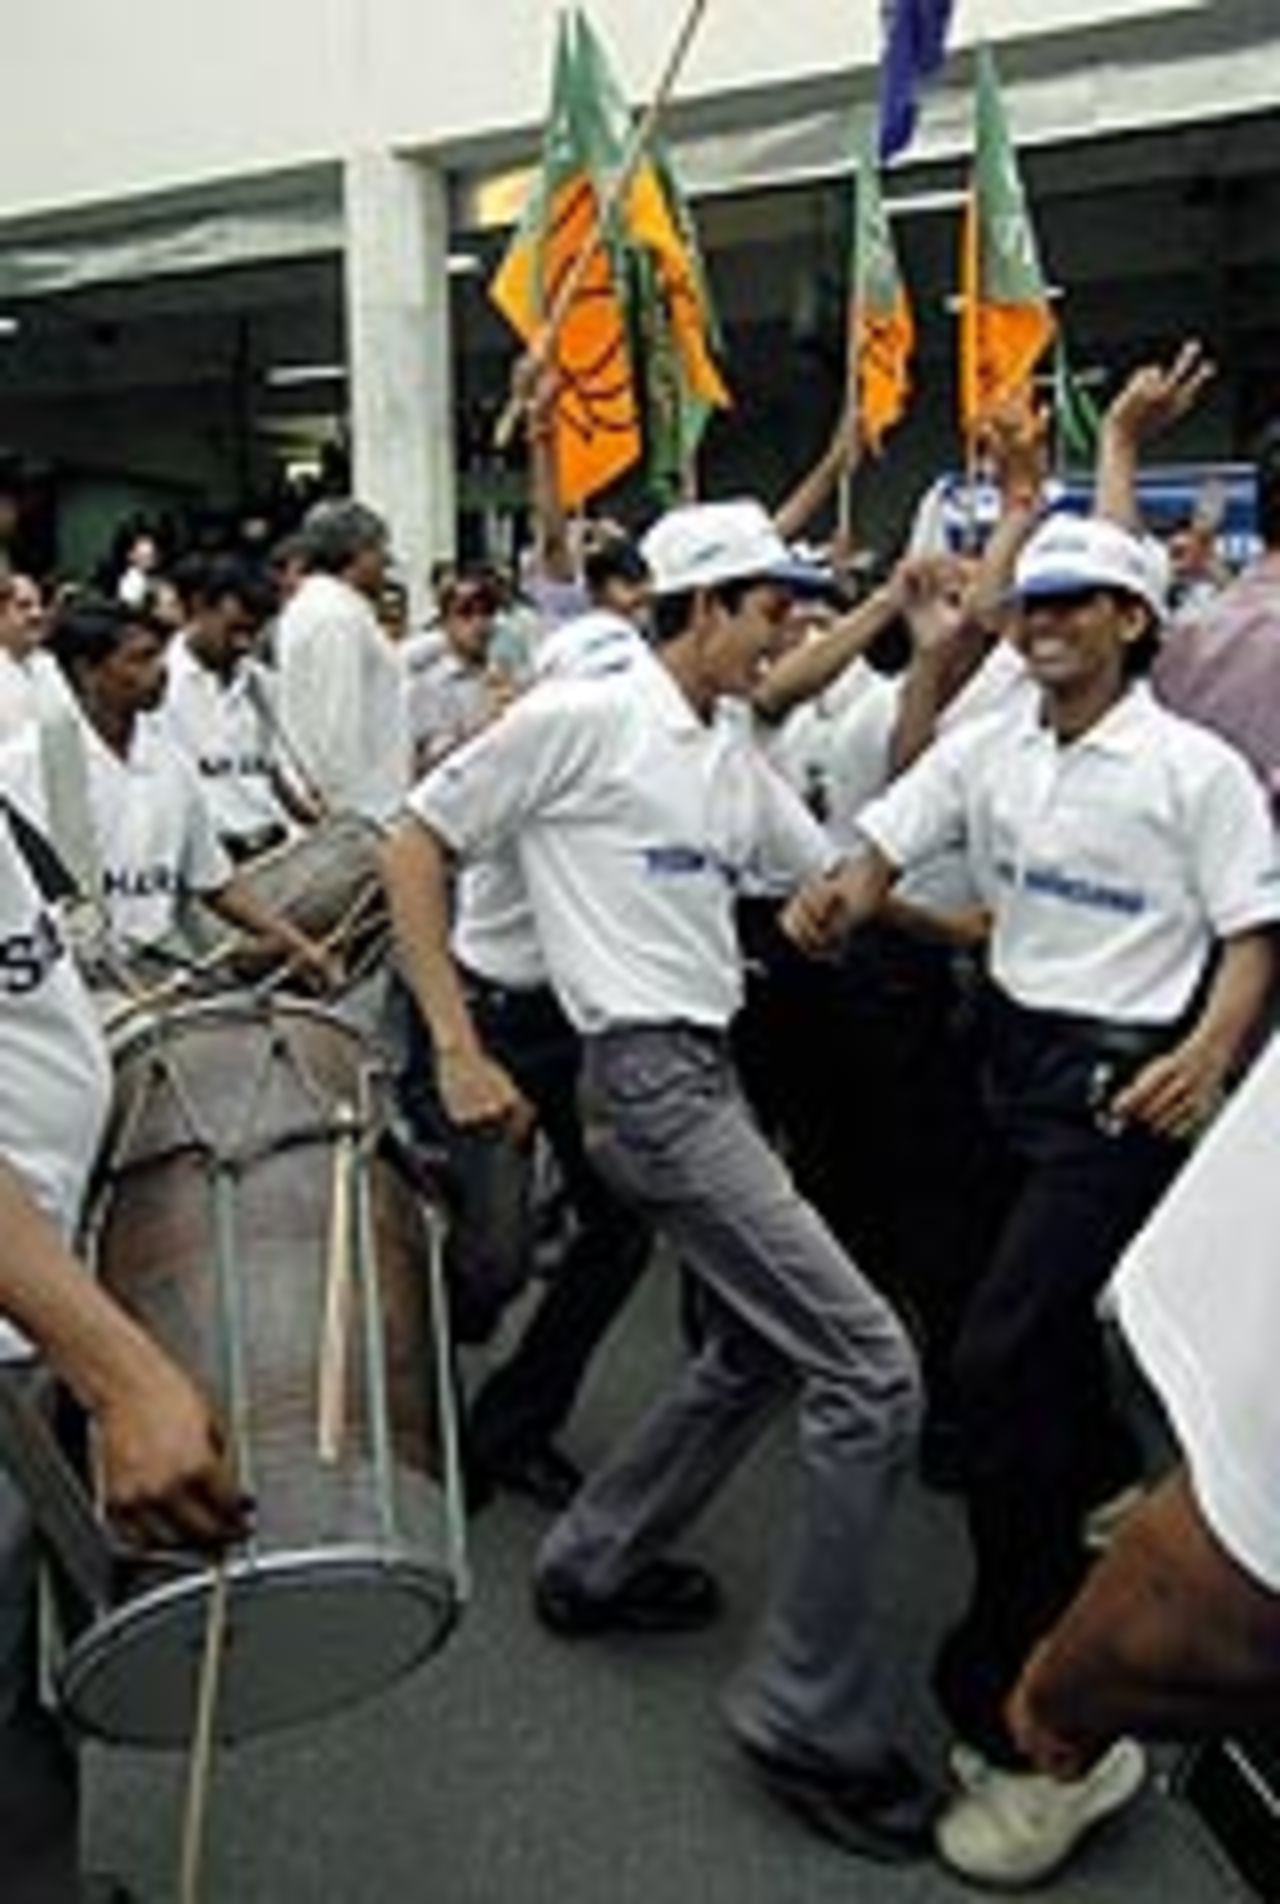 Indian supporters celebrate at the Indira Gandhi Airport in New Delhi, April 17, 2004